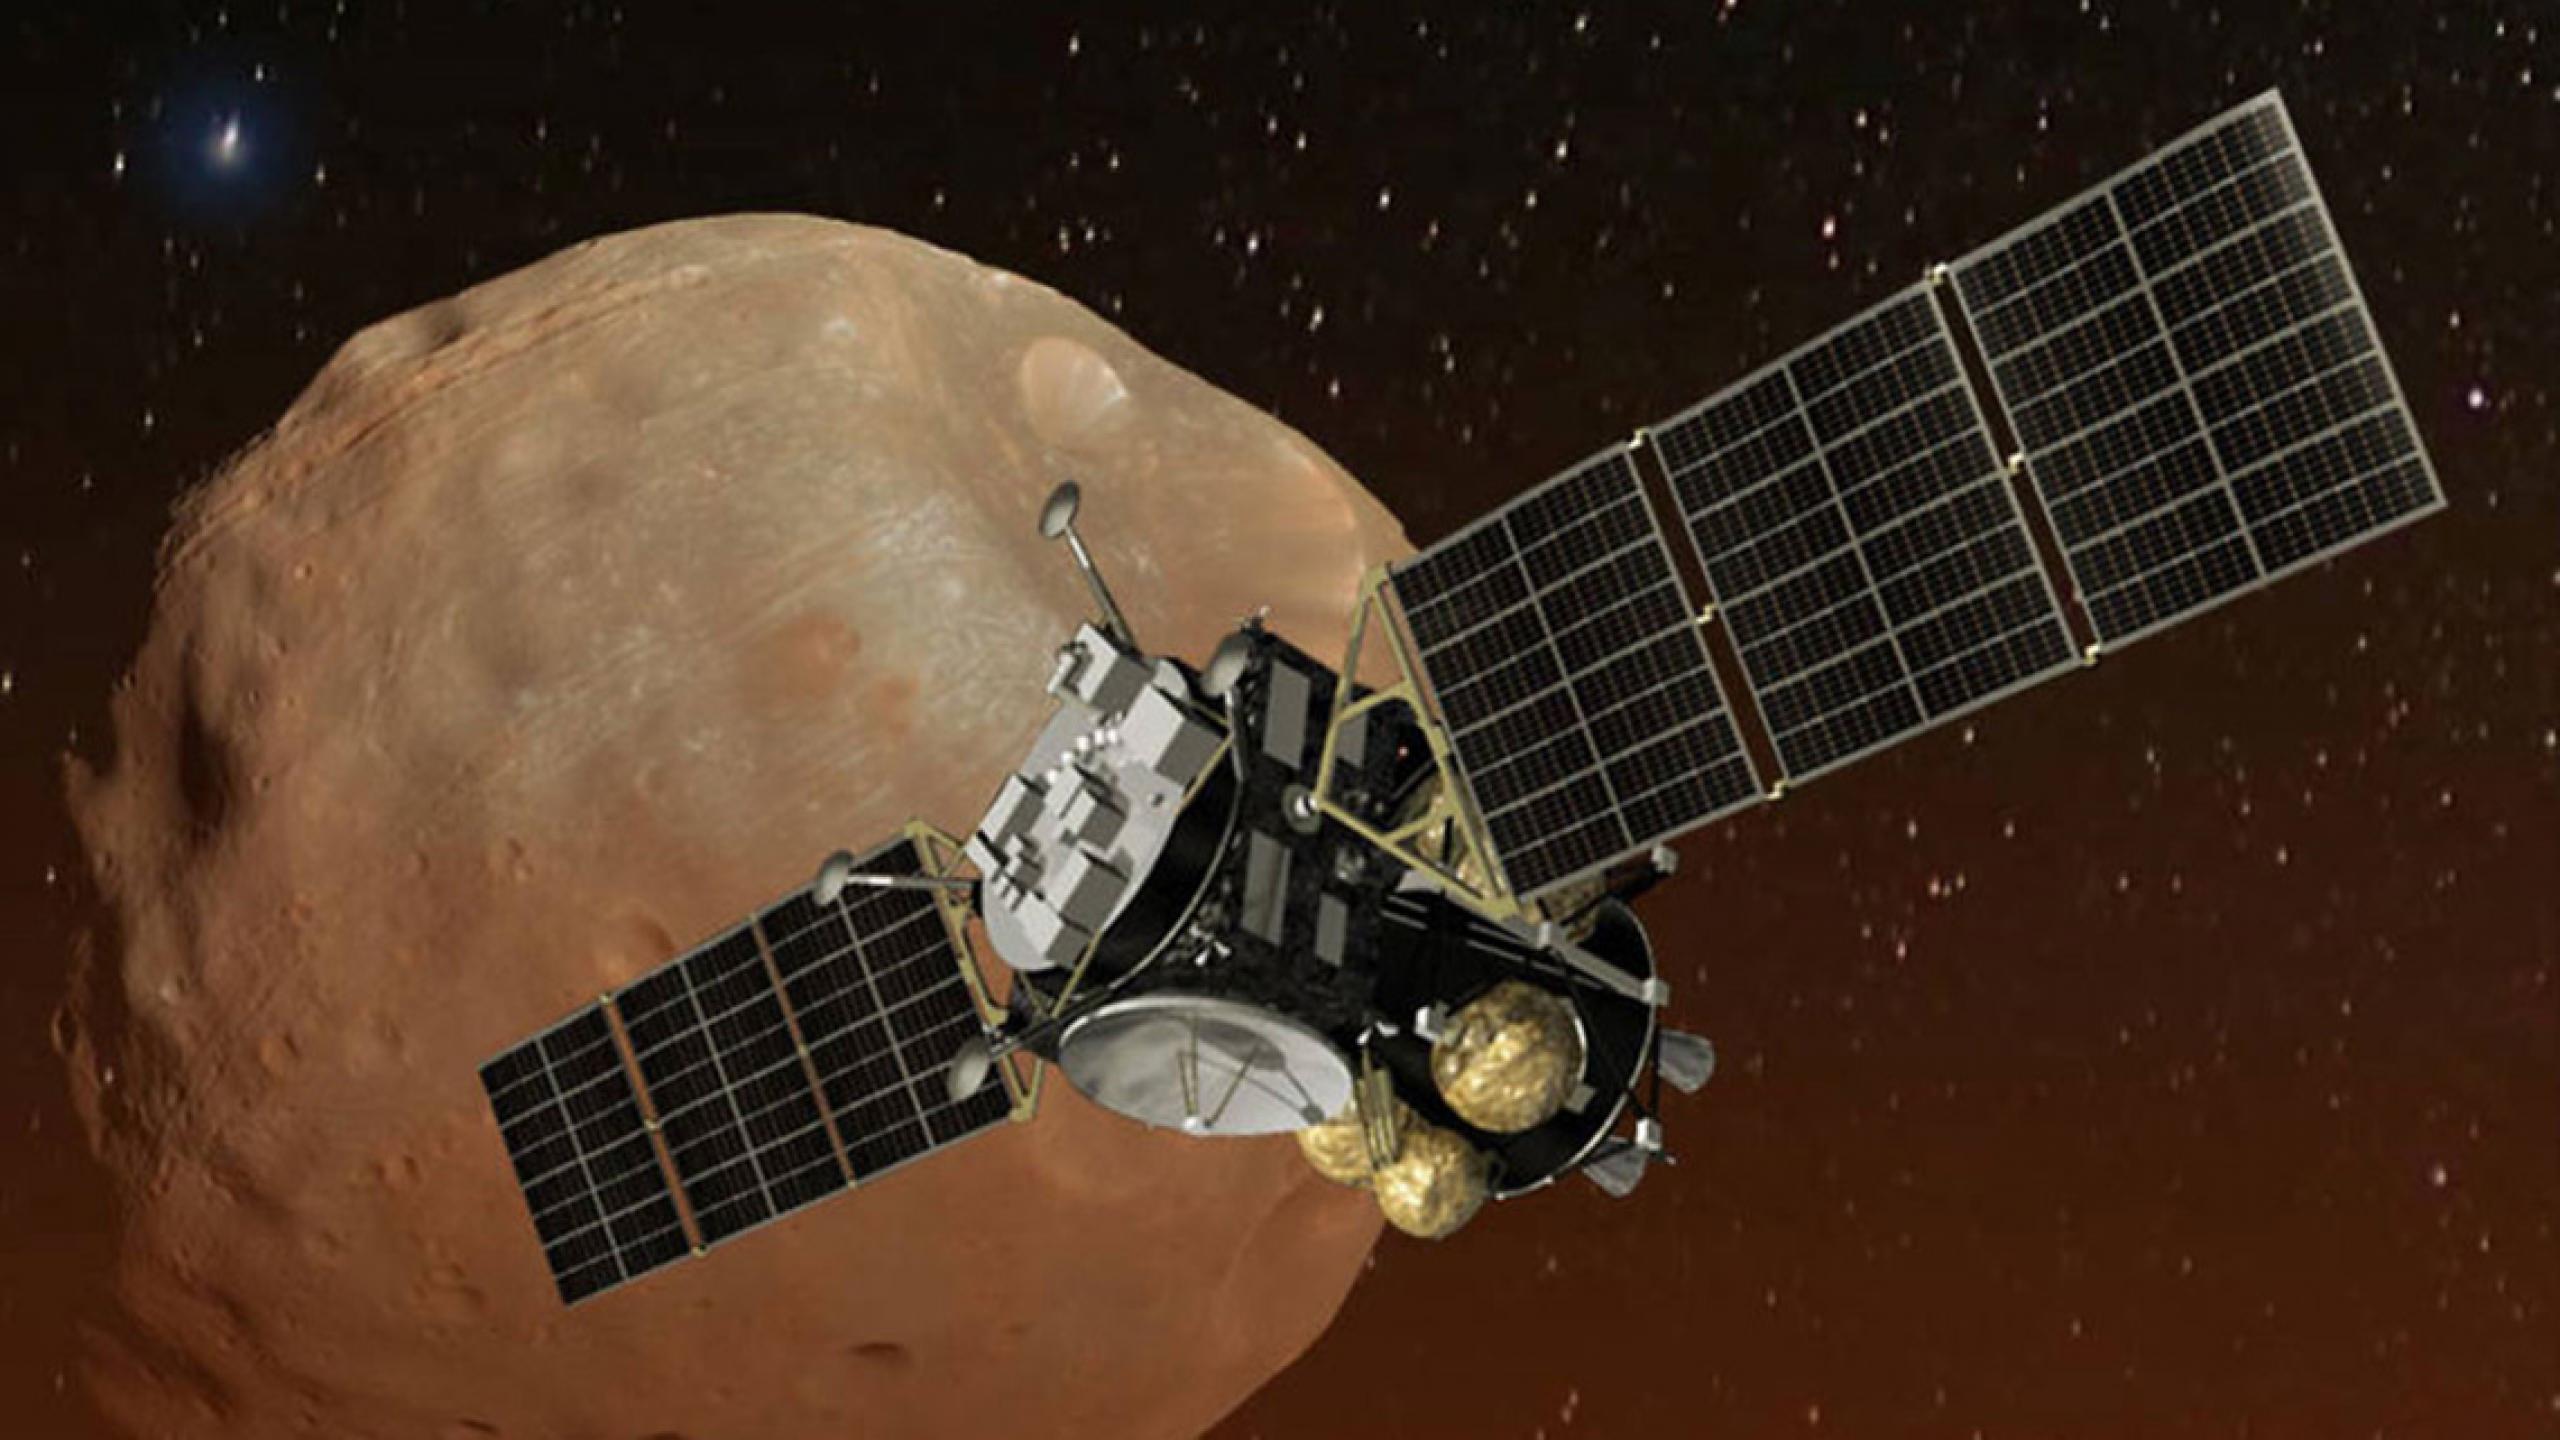 Spacecraft with extended solar panels in orbit over Mars